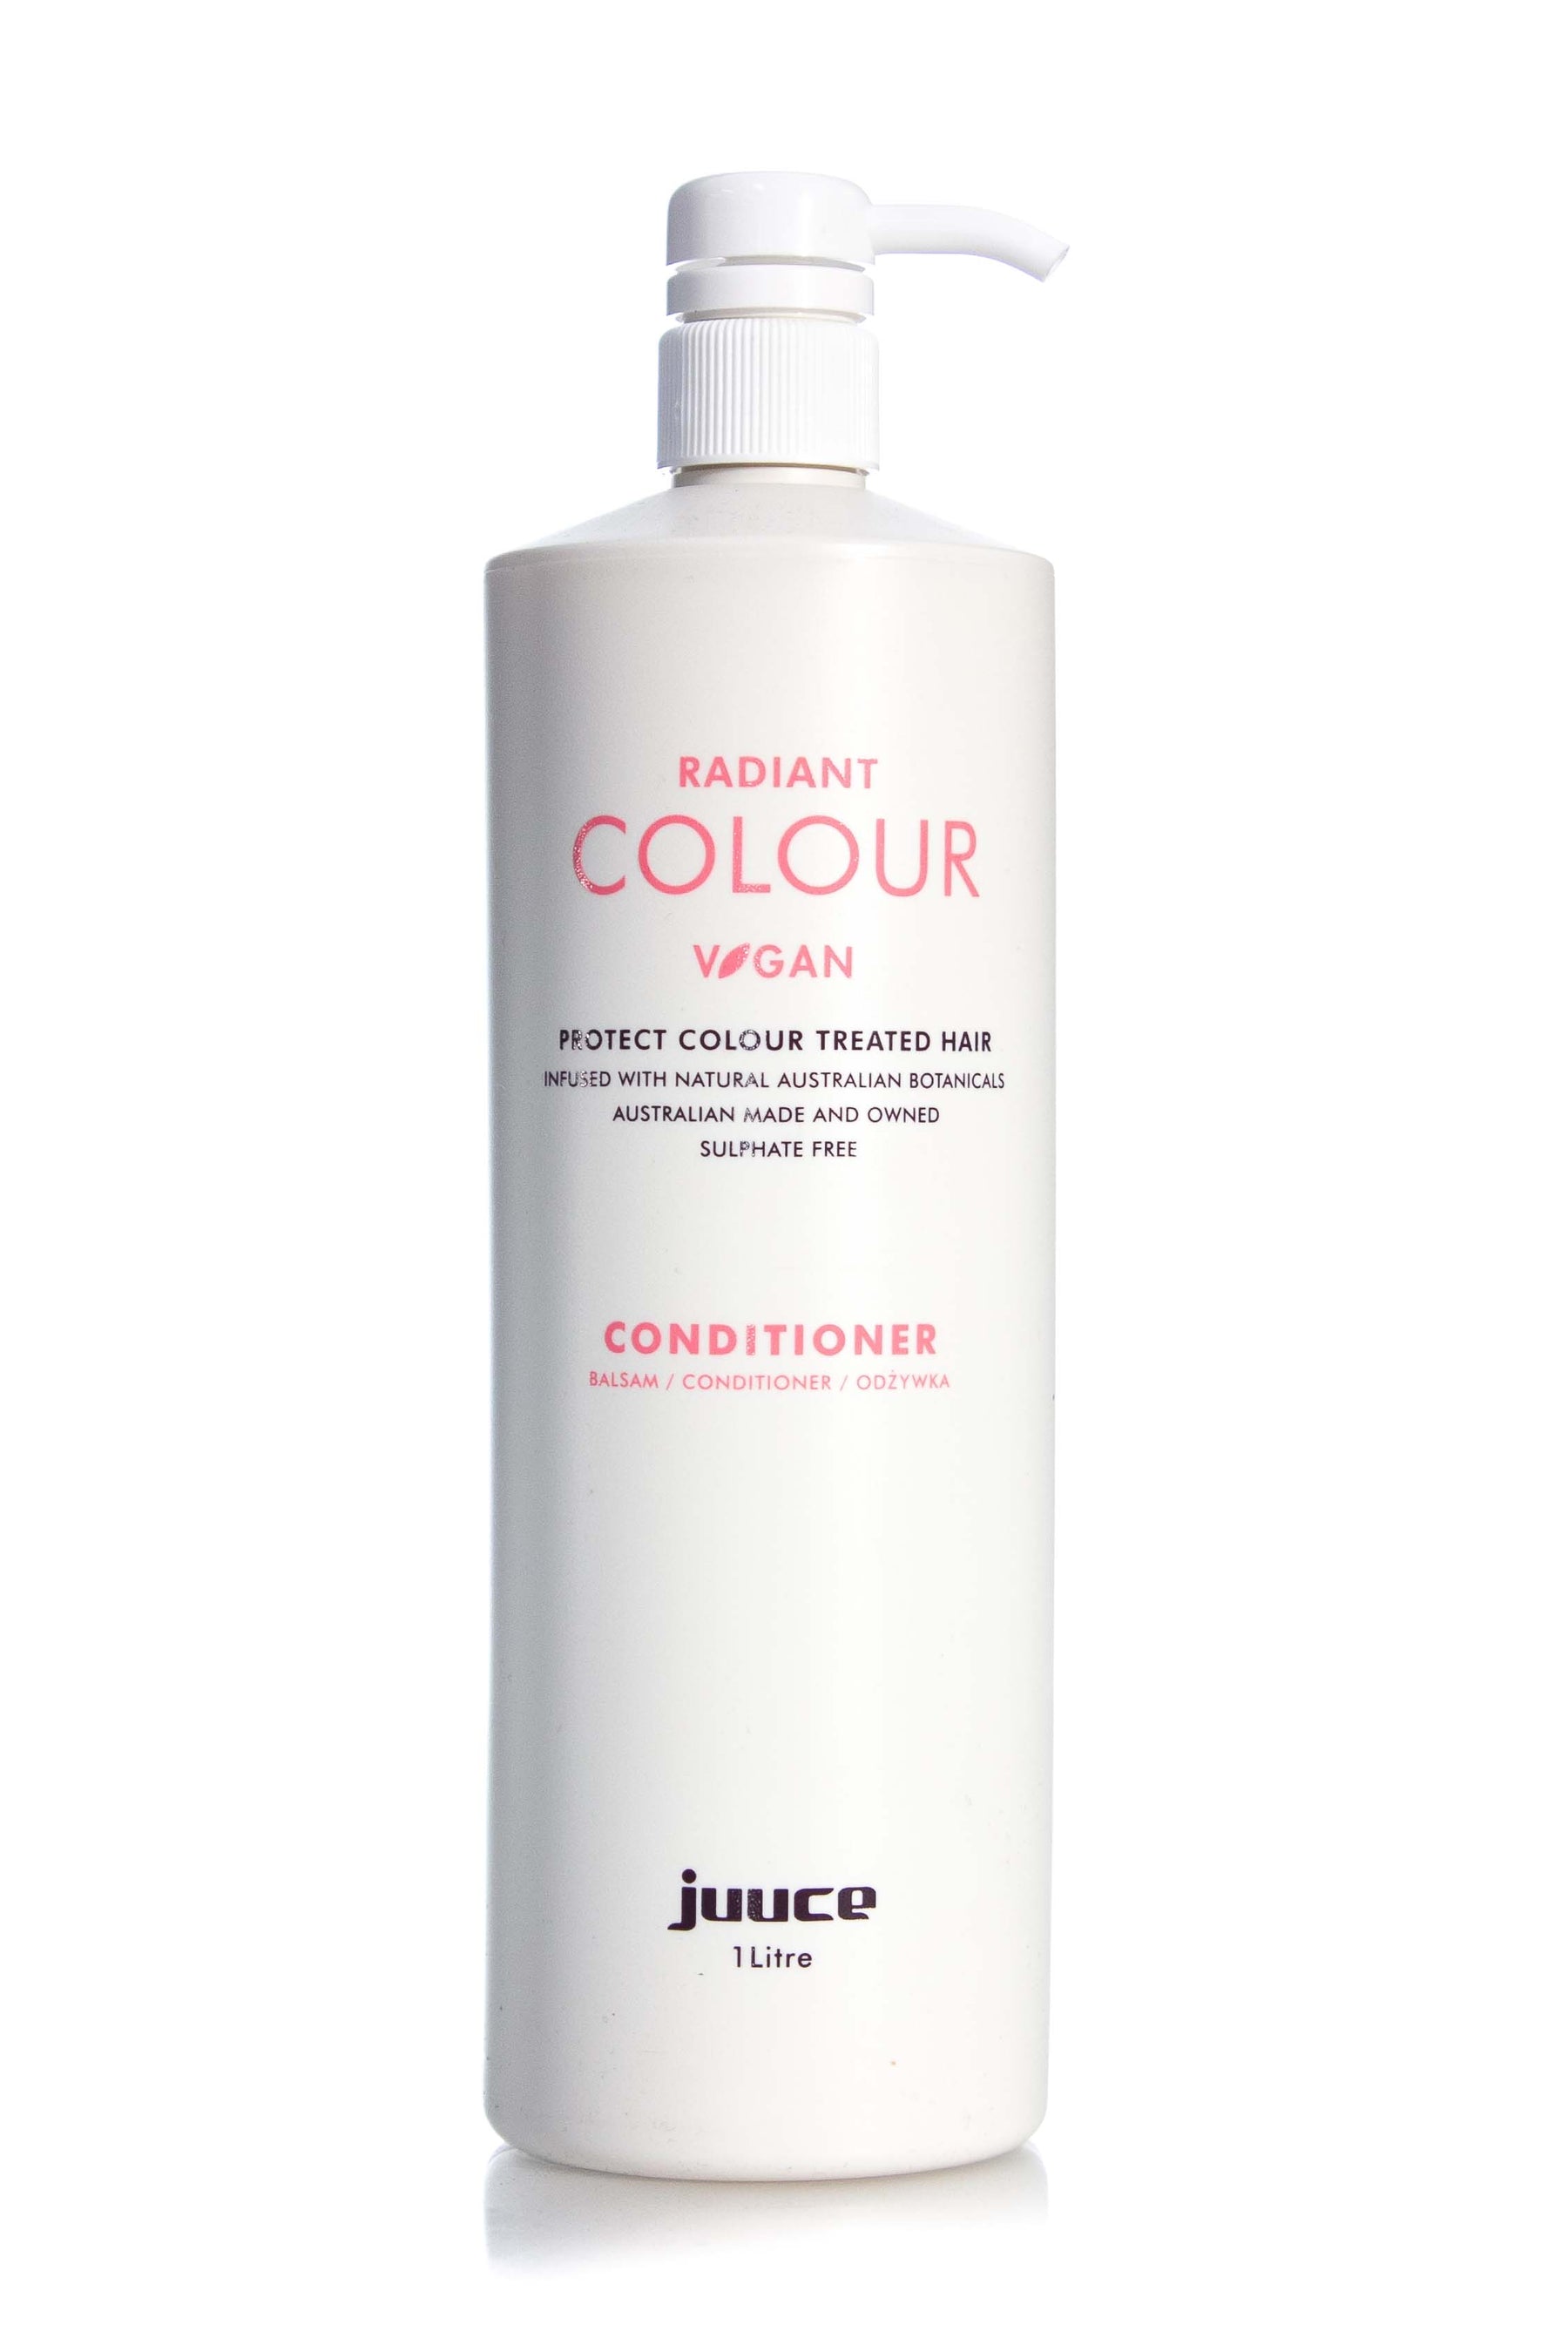 Juuce RADIANT COLOUR CONDITIONER 1LT (previously Colour Life)